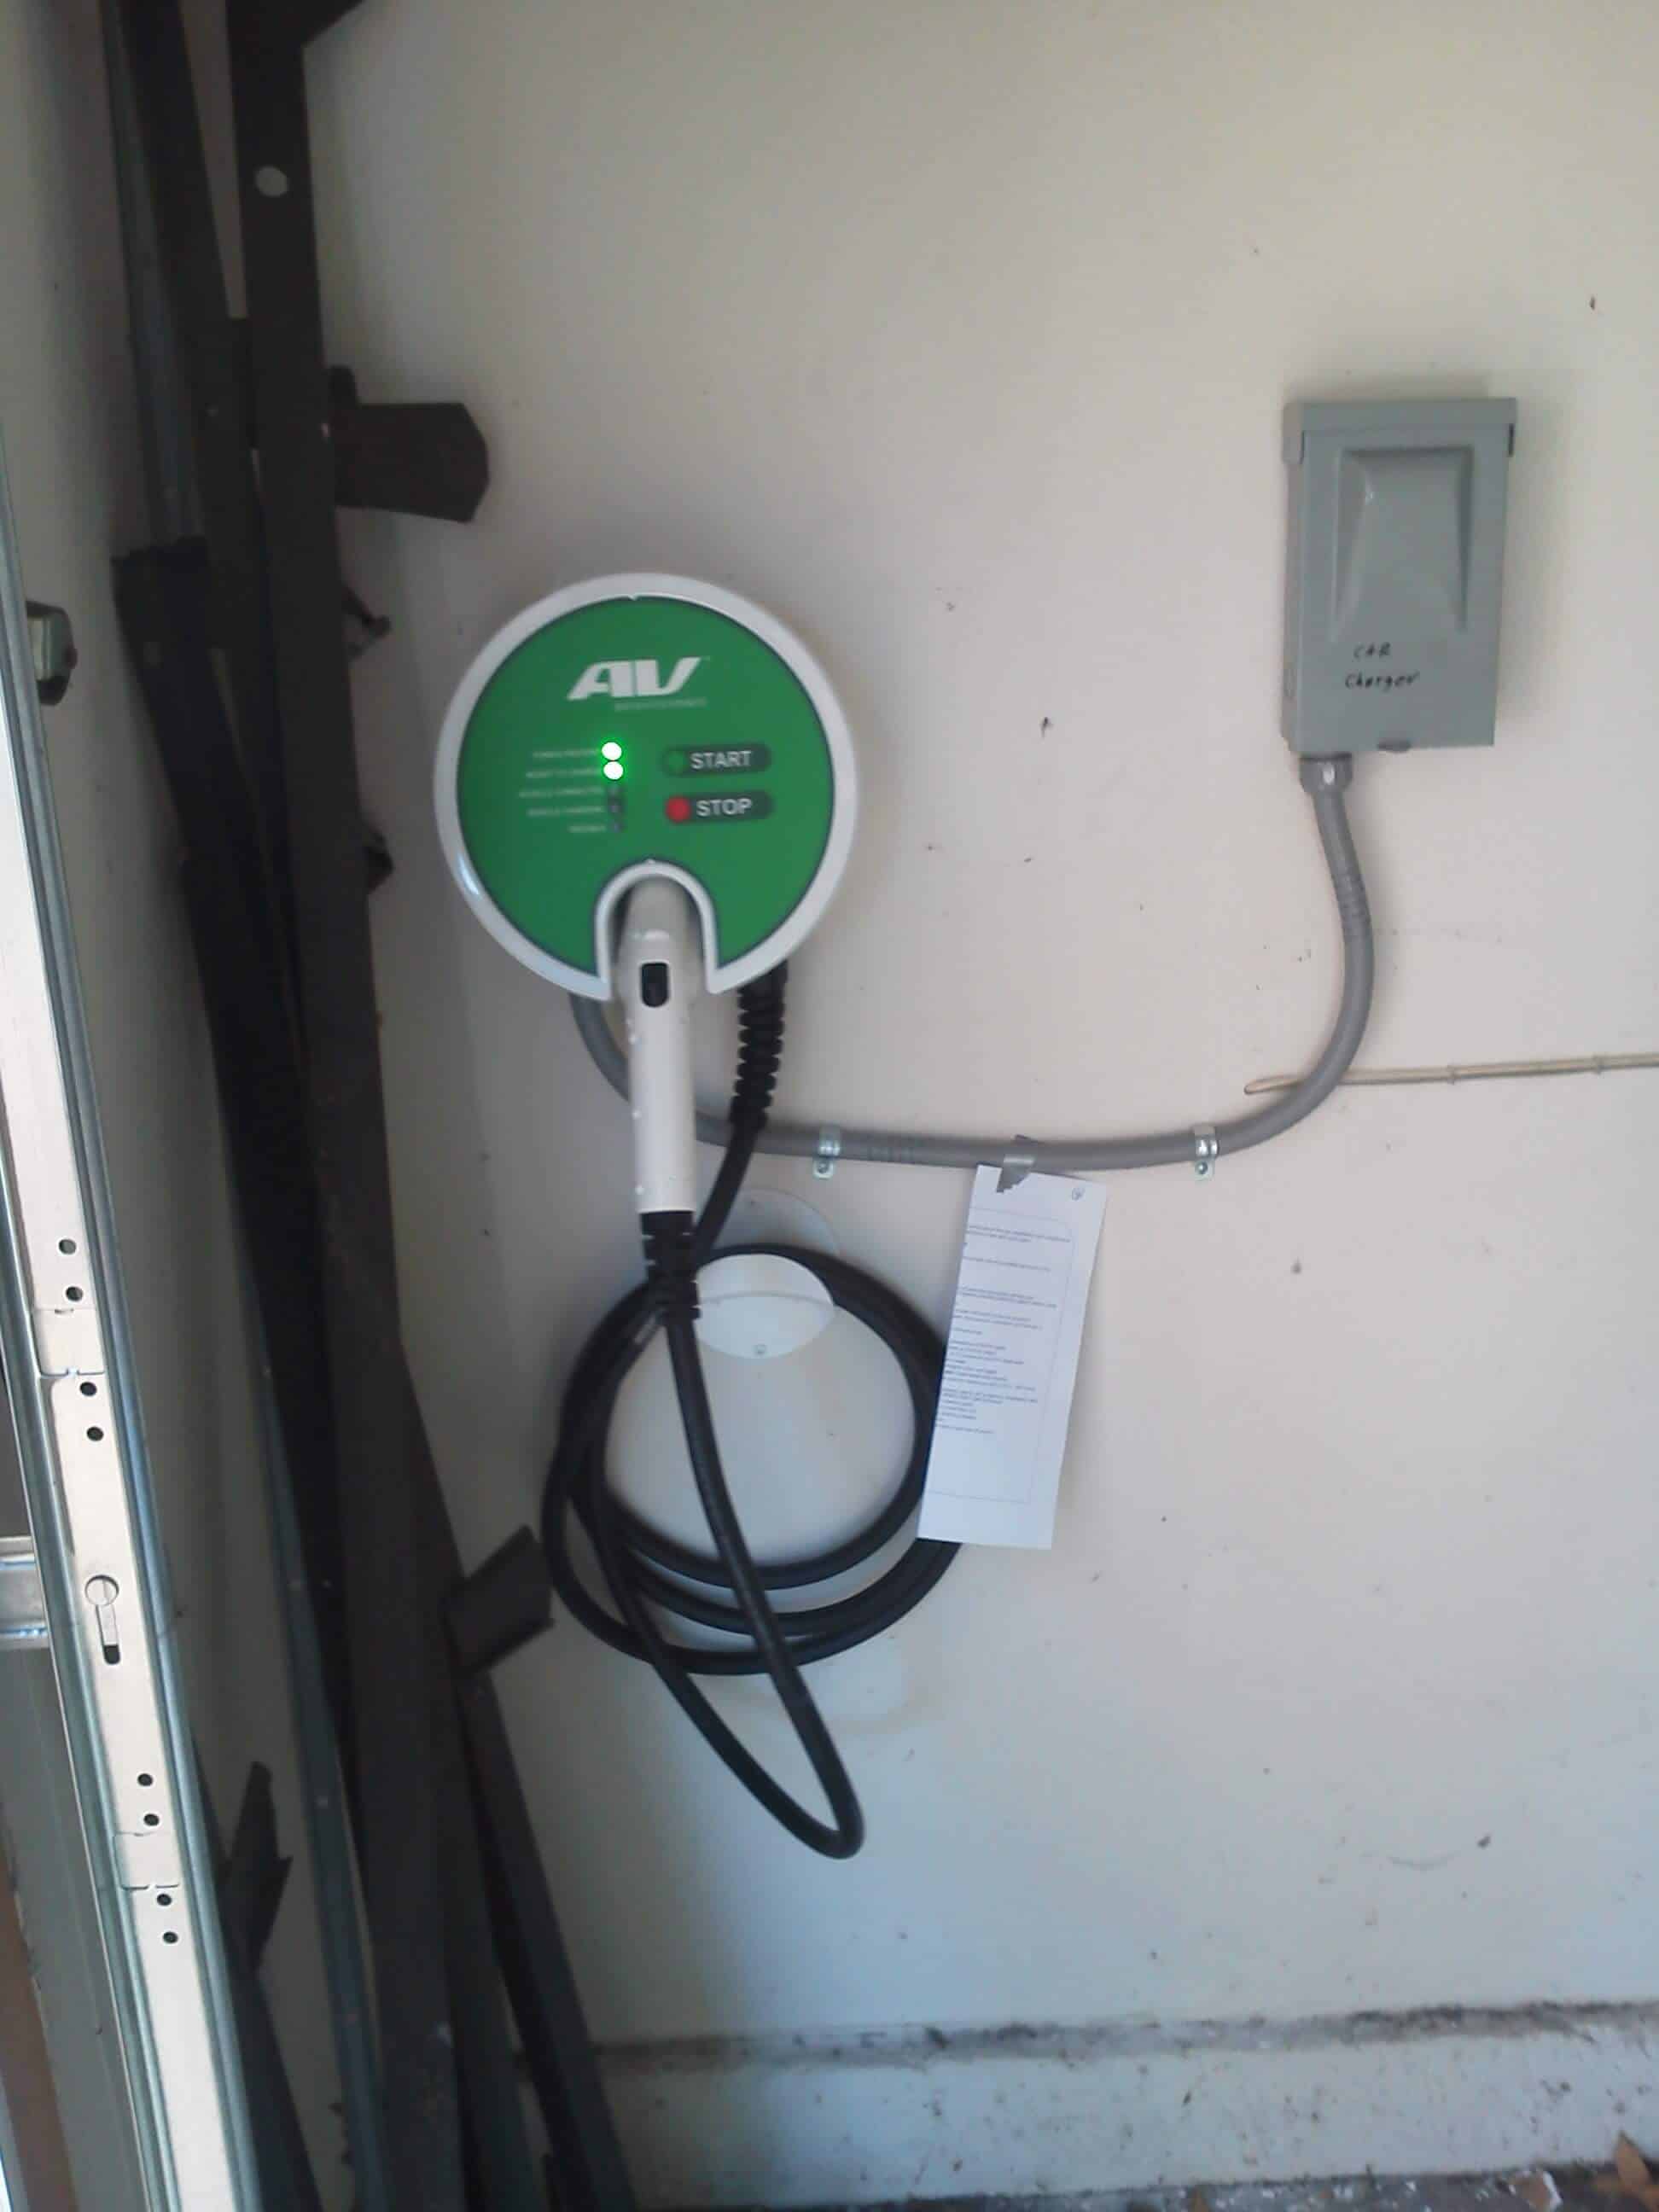 Do All Electric Vehicles Use The Same Charger? Electrician Answers